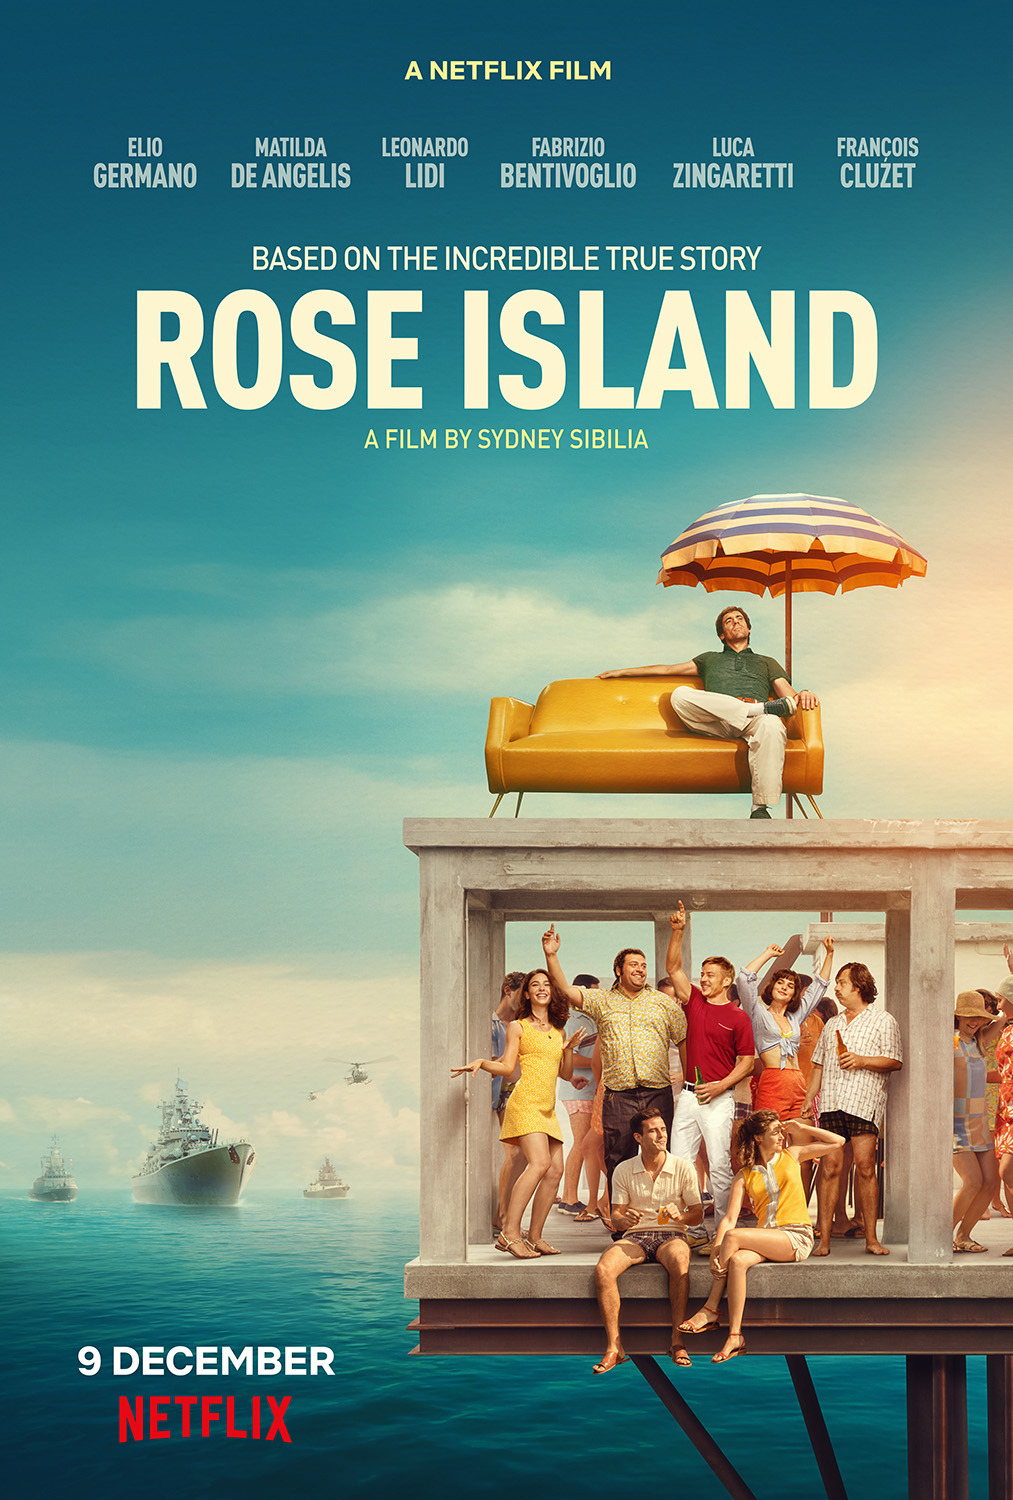 Extra Large TV Poster Image for L'incredibile storia dell'isola delle rose 